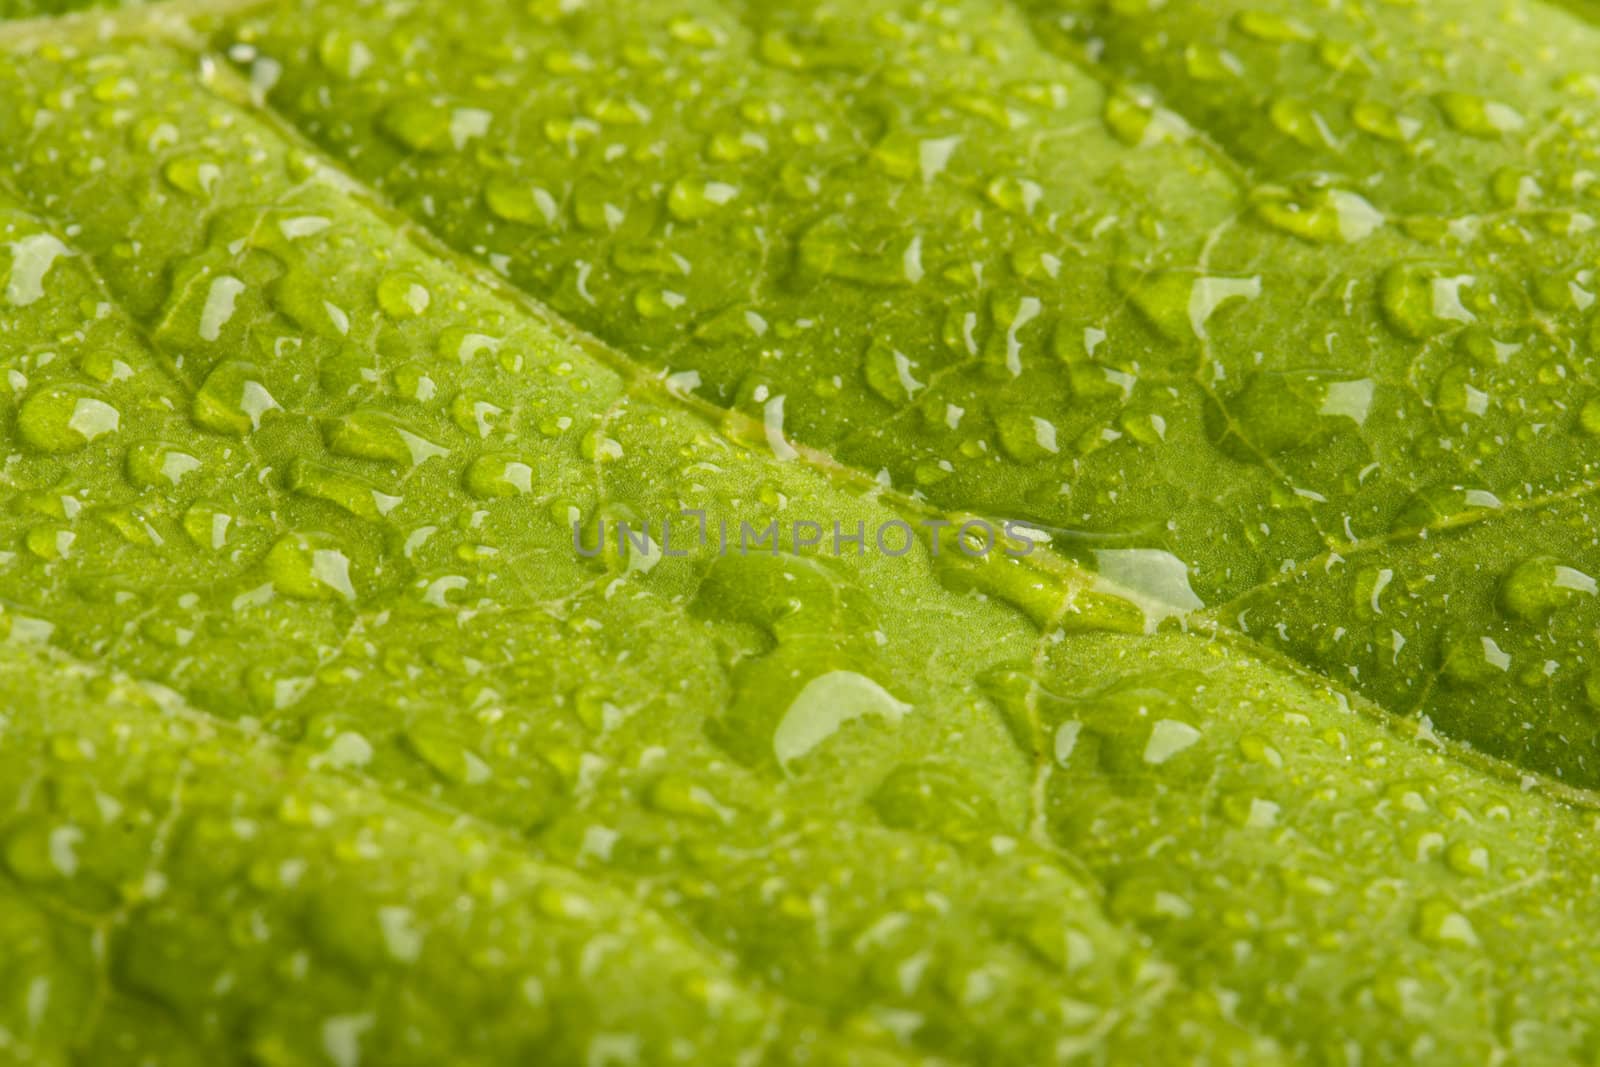 Green leaf with water droplets - shallow DOF